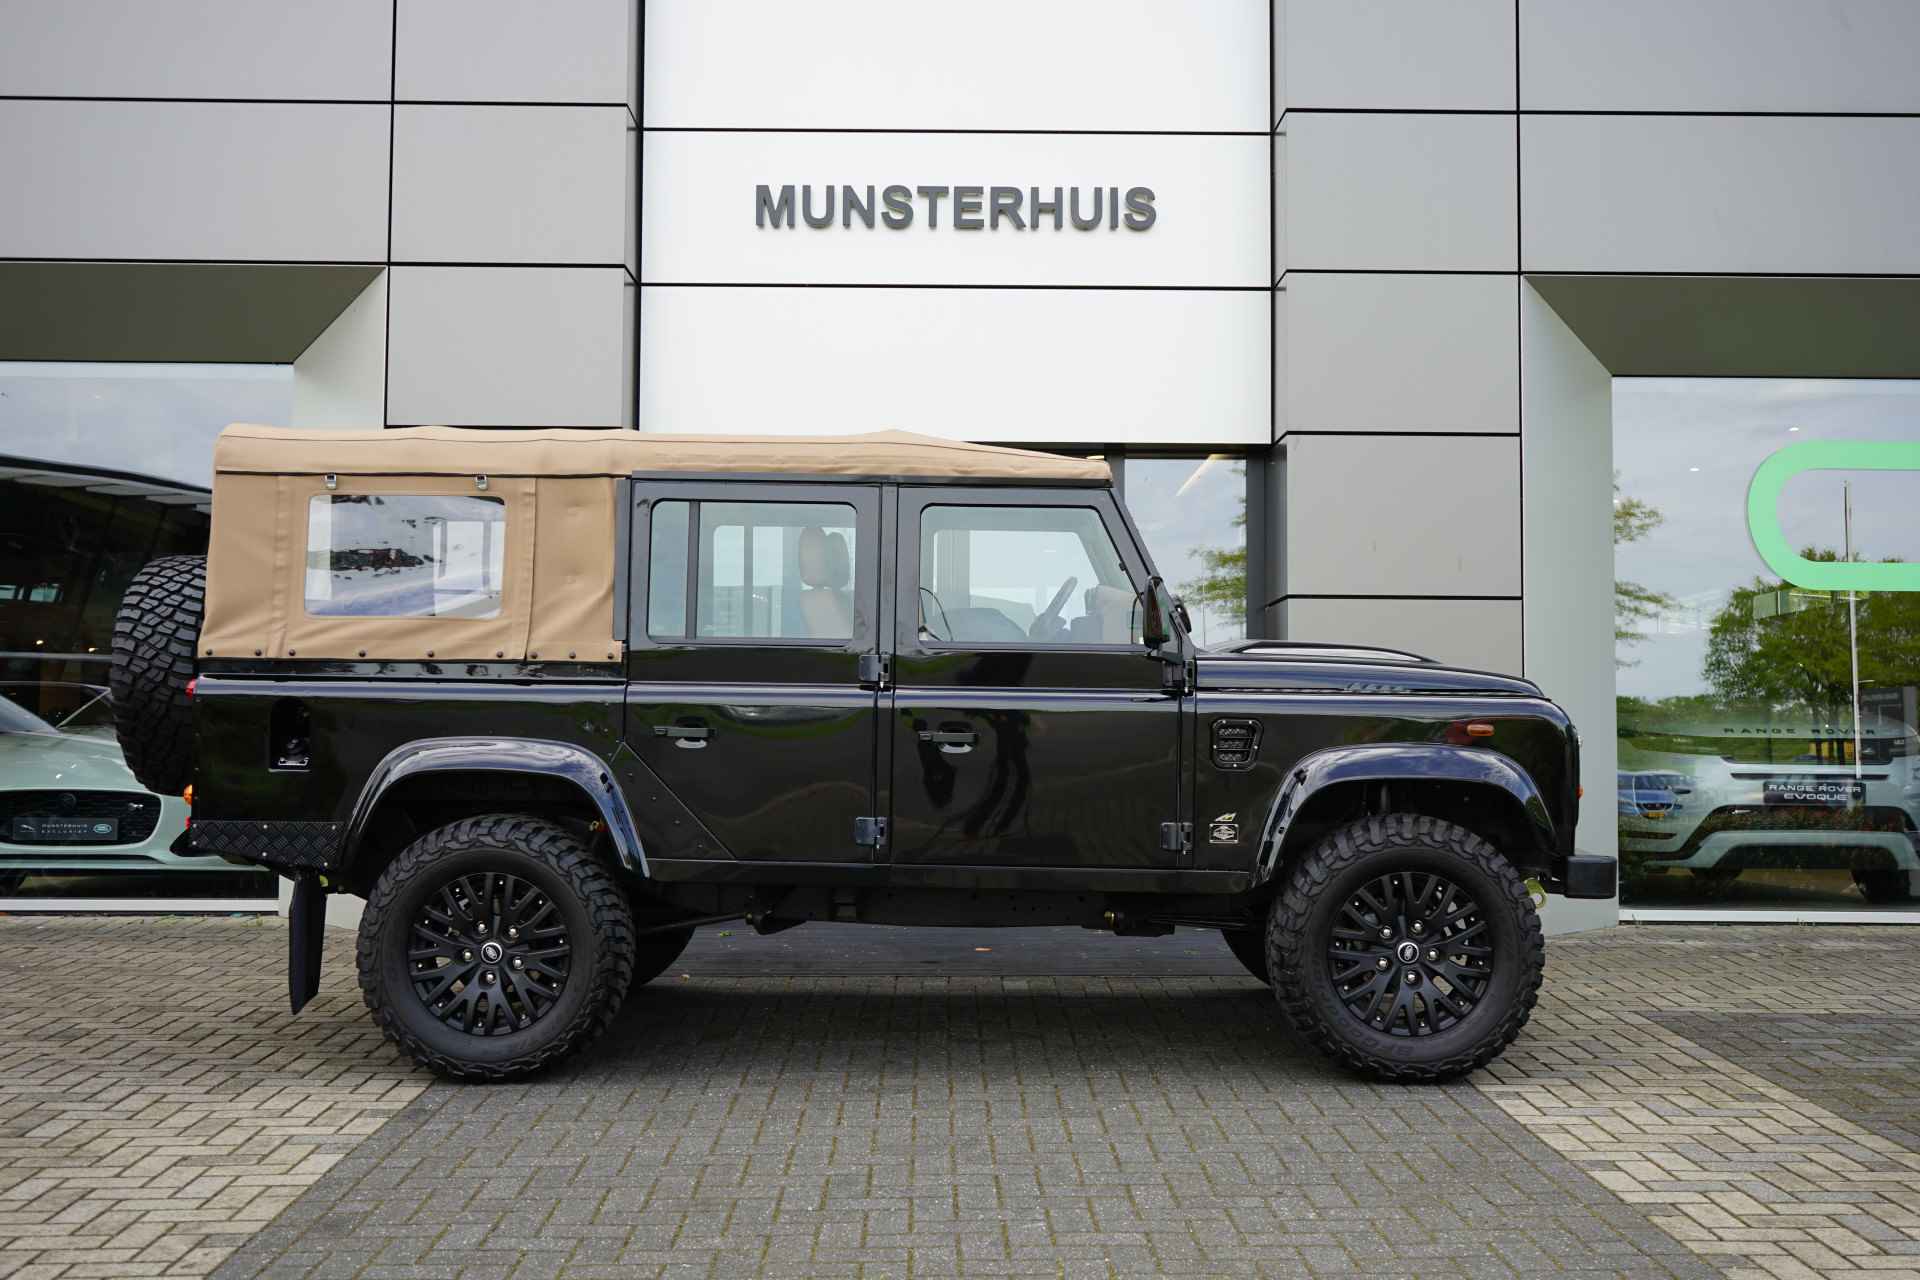 Land Rover Defender 2.4 TD 110 SW Convertible Brand New - River House Rebuild, Butterscotch Leather, BF Goodridge Tyres - 11/26